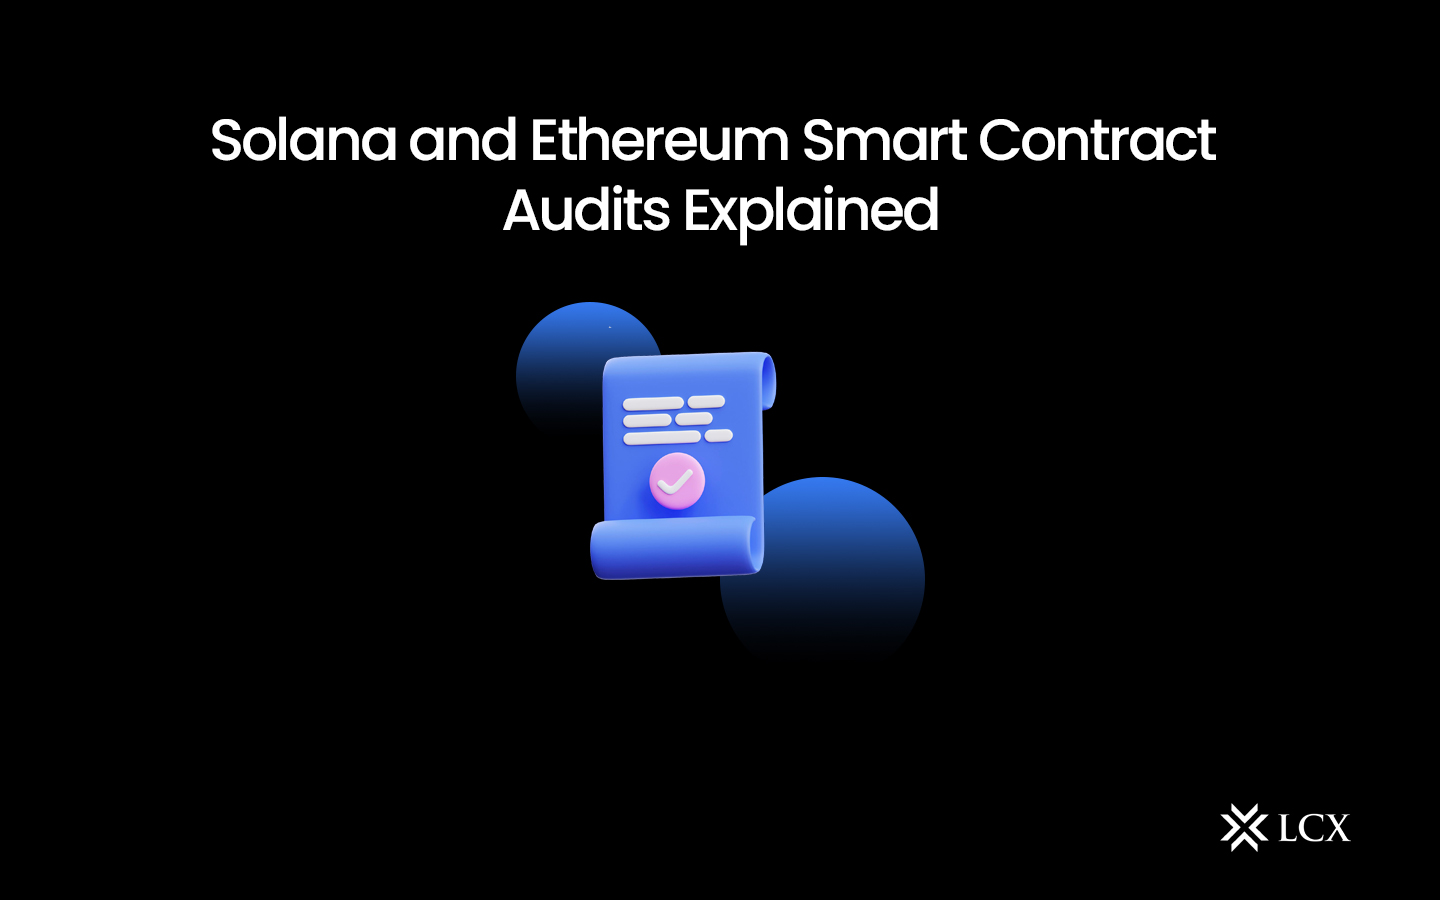 Solana and Ethereum Smart Contract Audits Explained